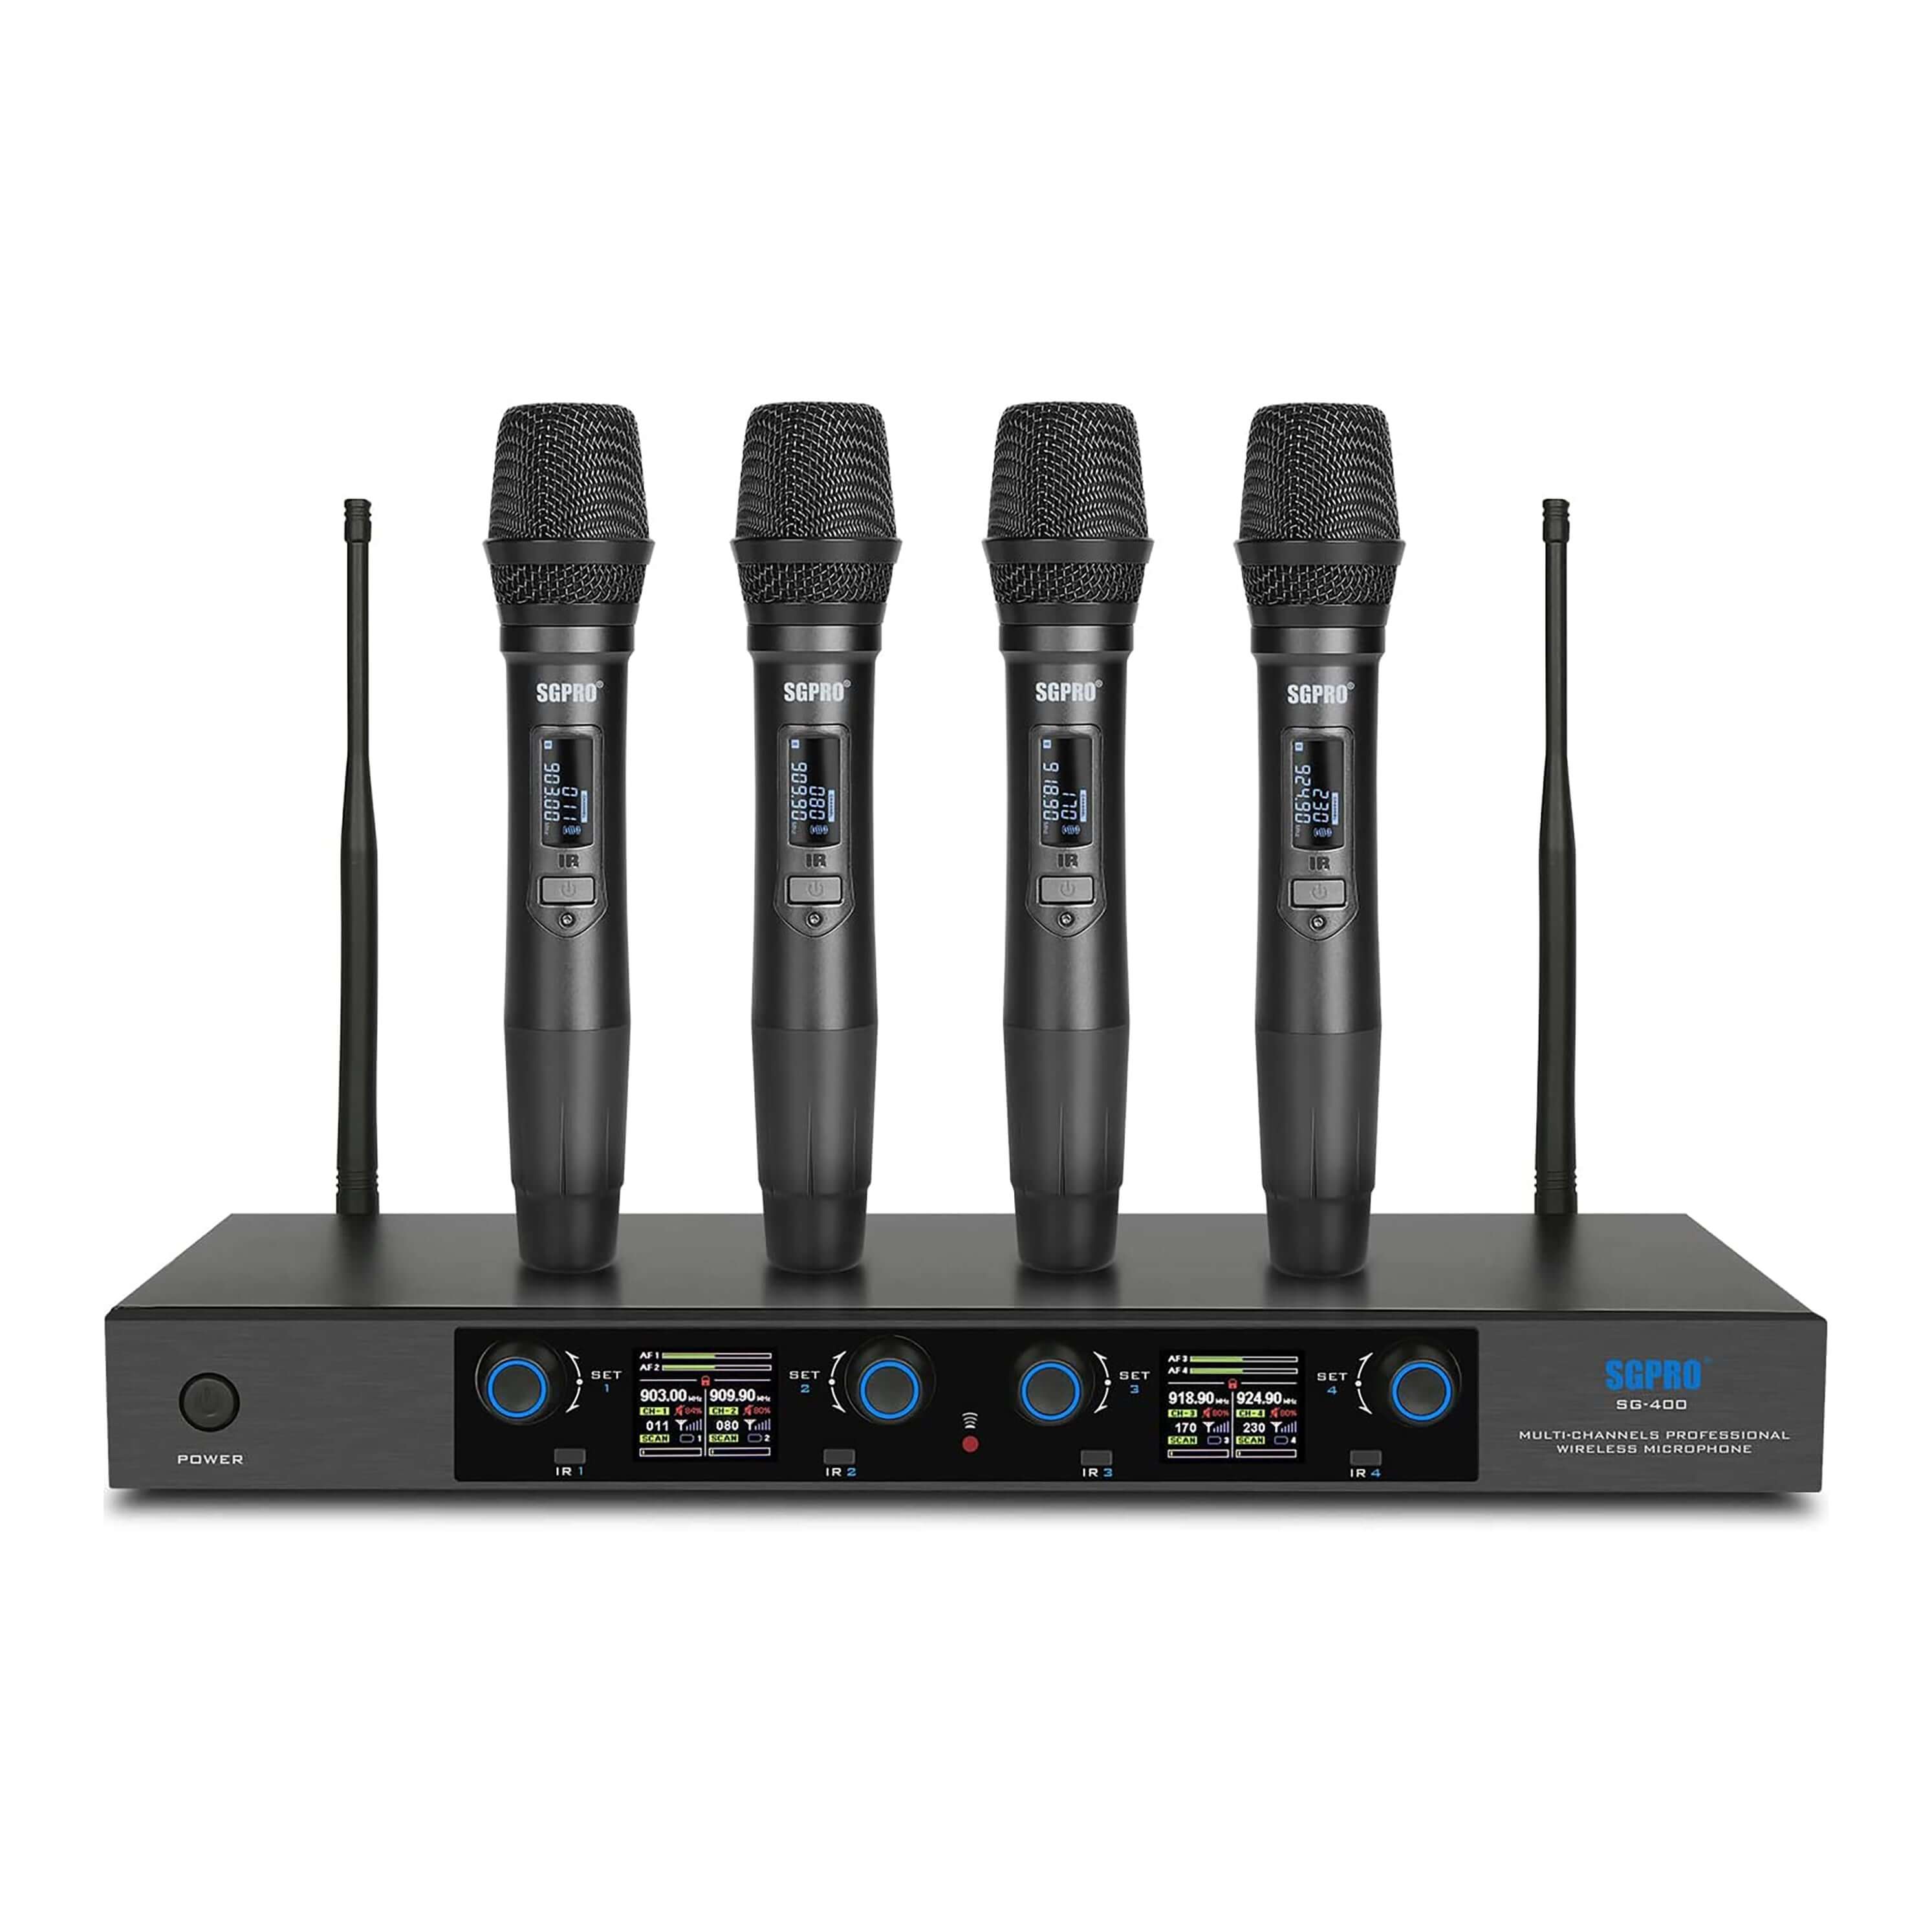 Wireless PRO, Compact Wireless Microphone System